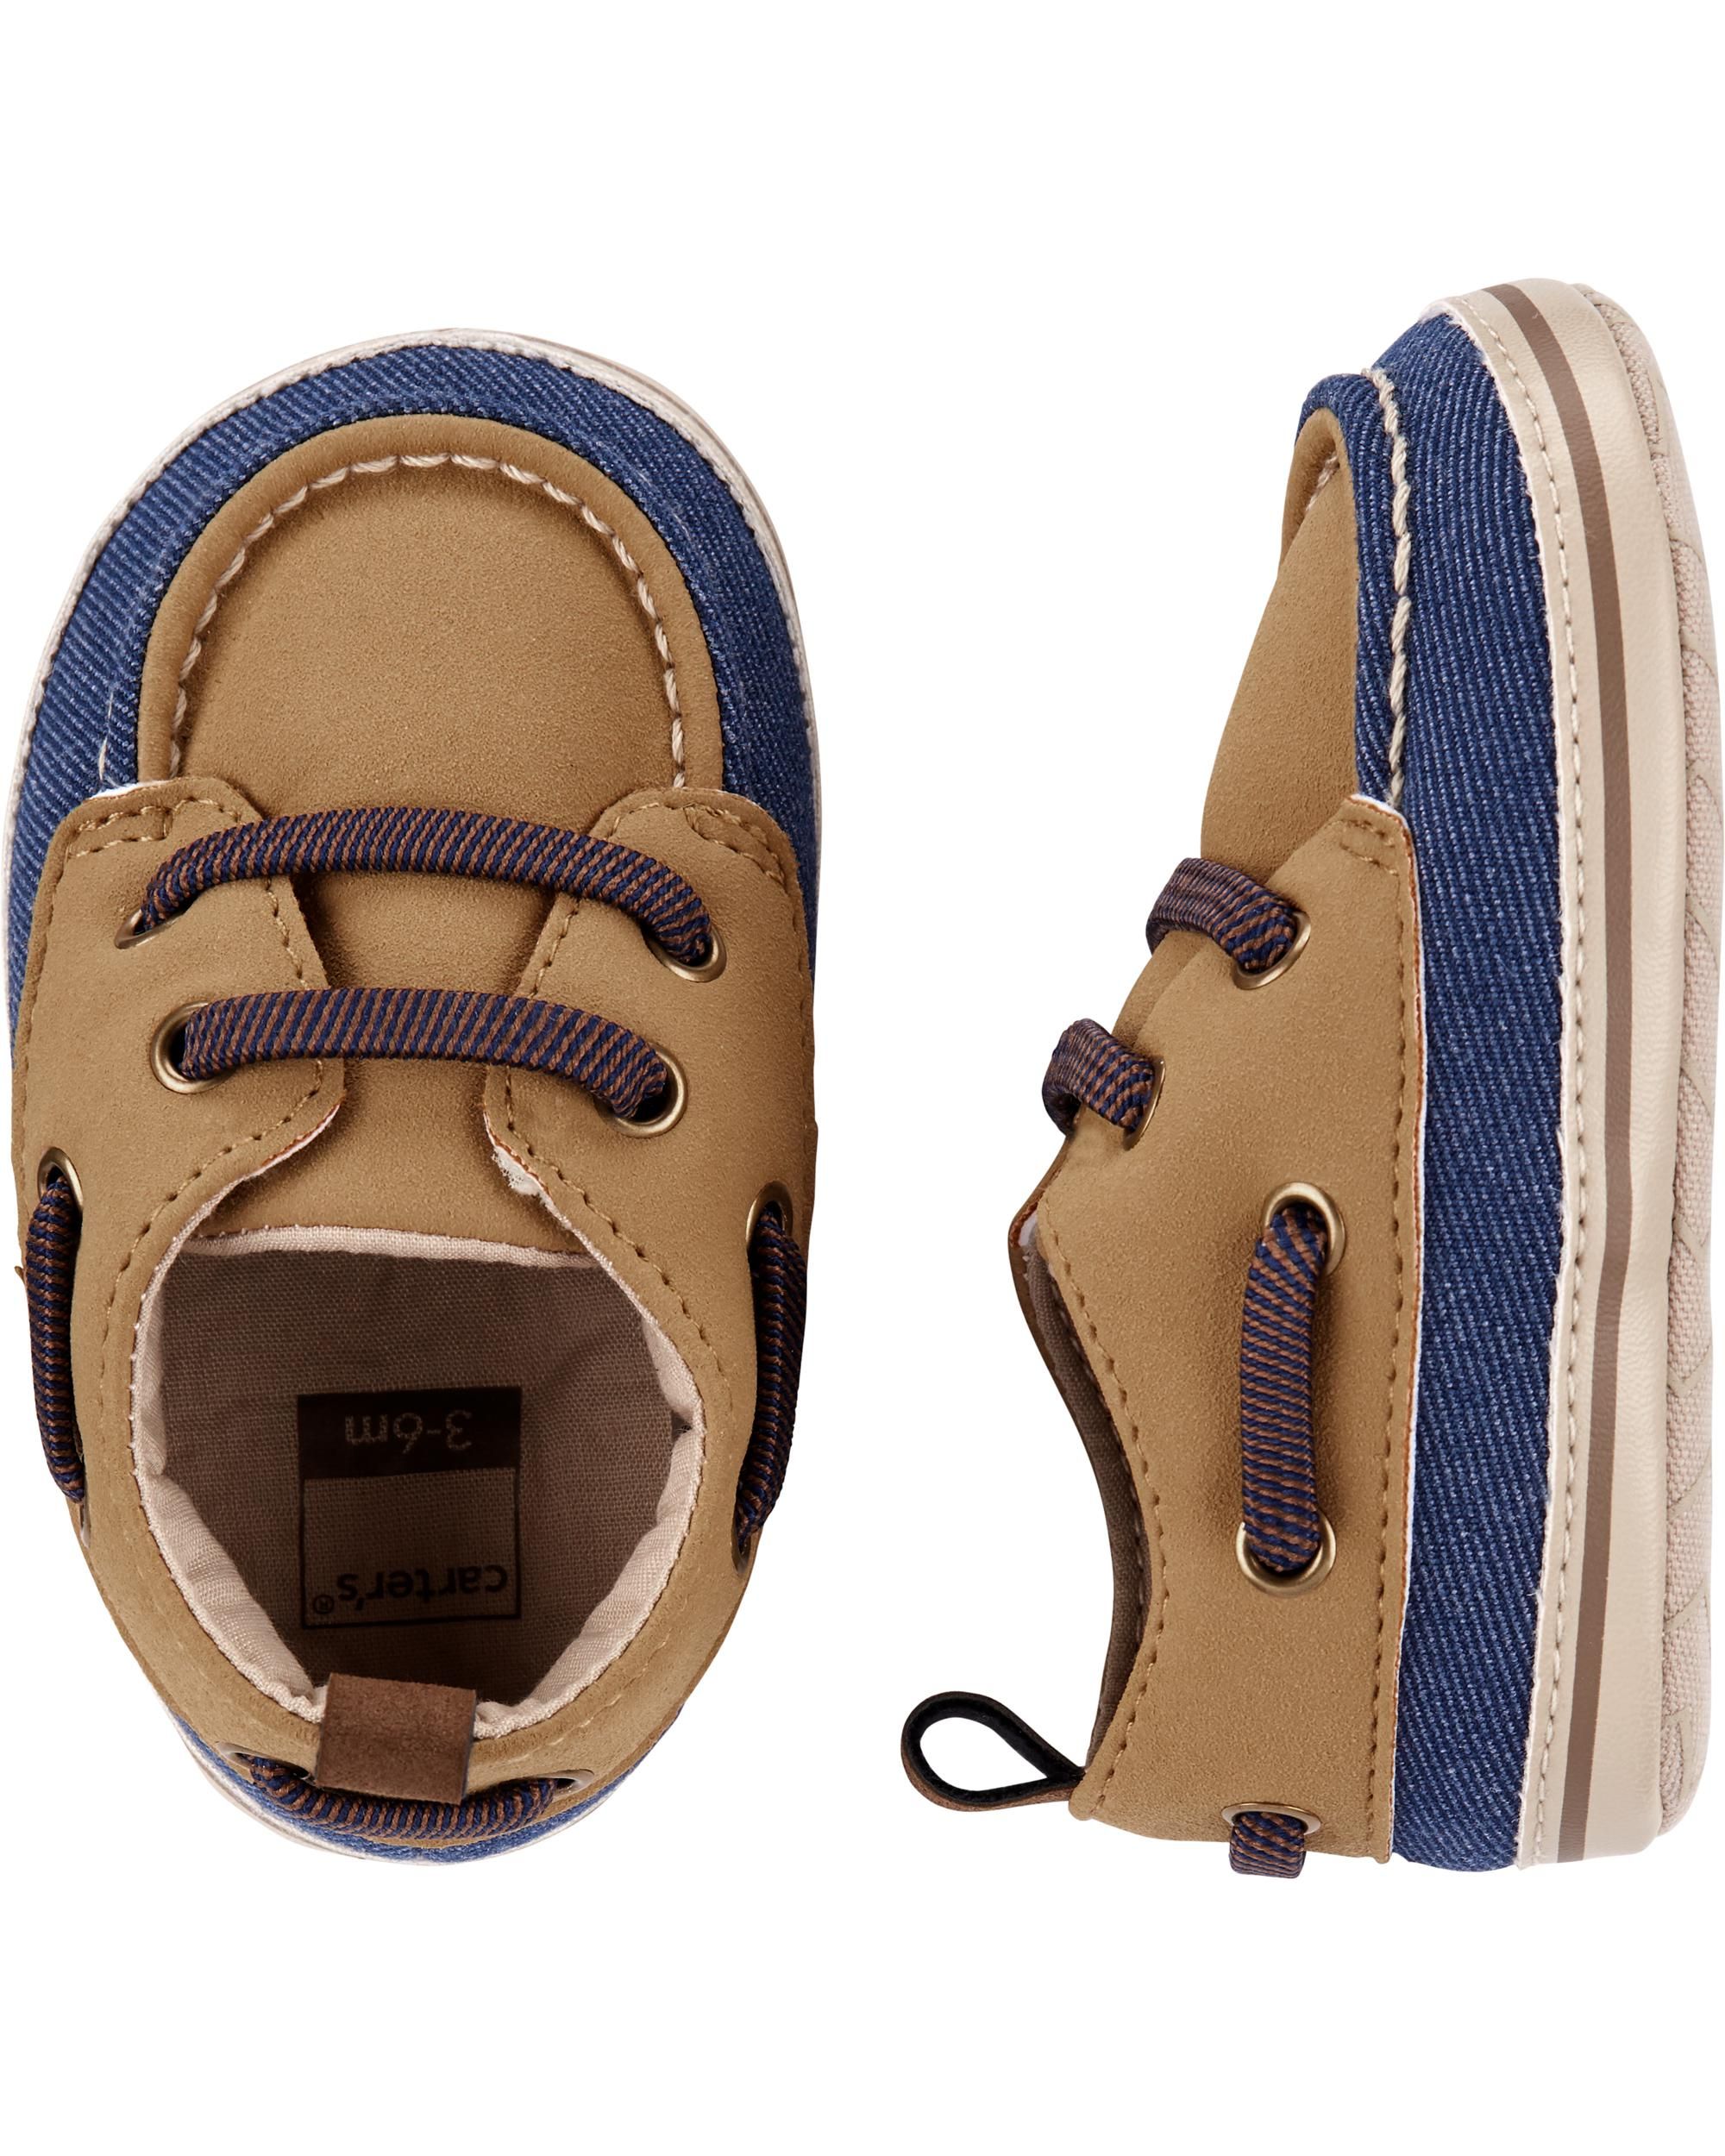 Carter's Boat Shoes | Carter's